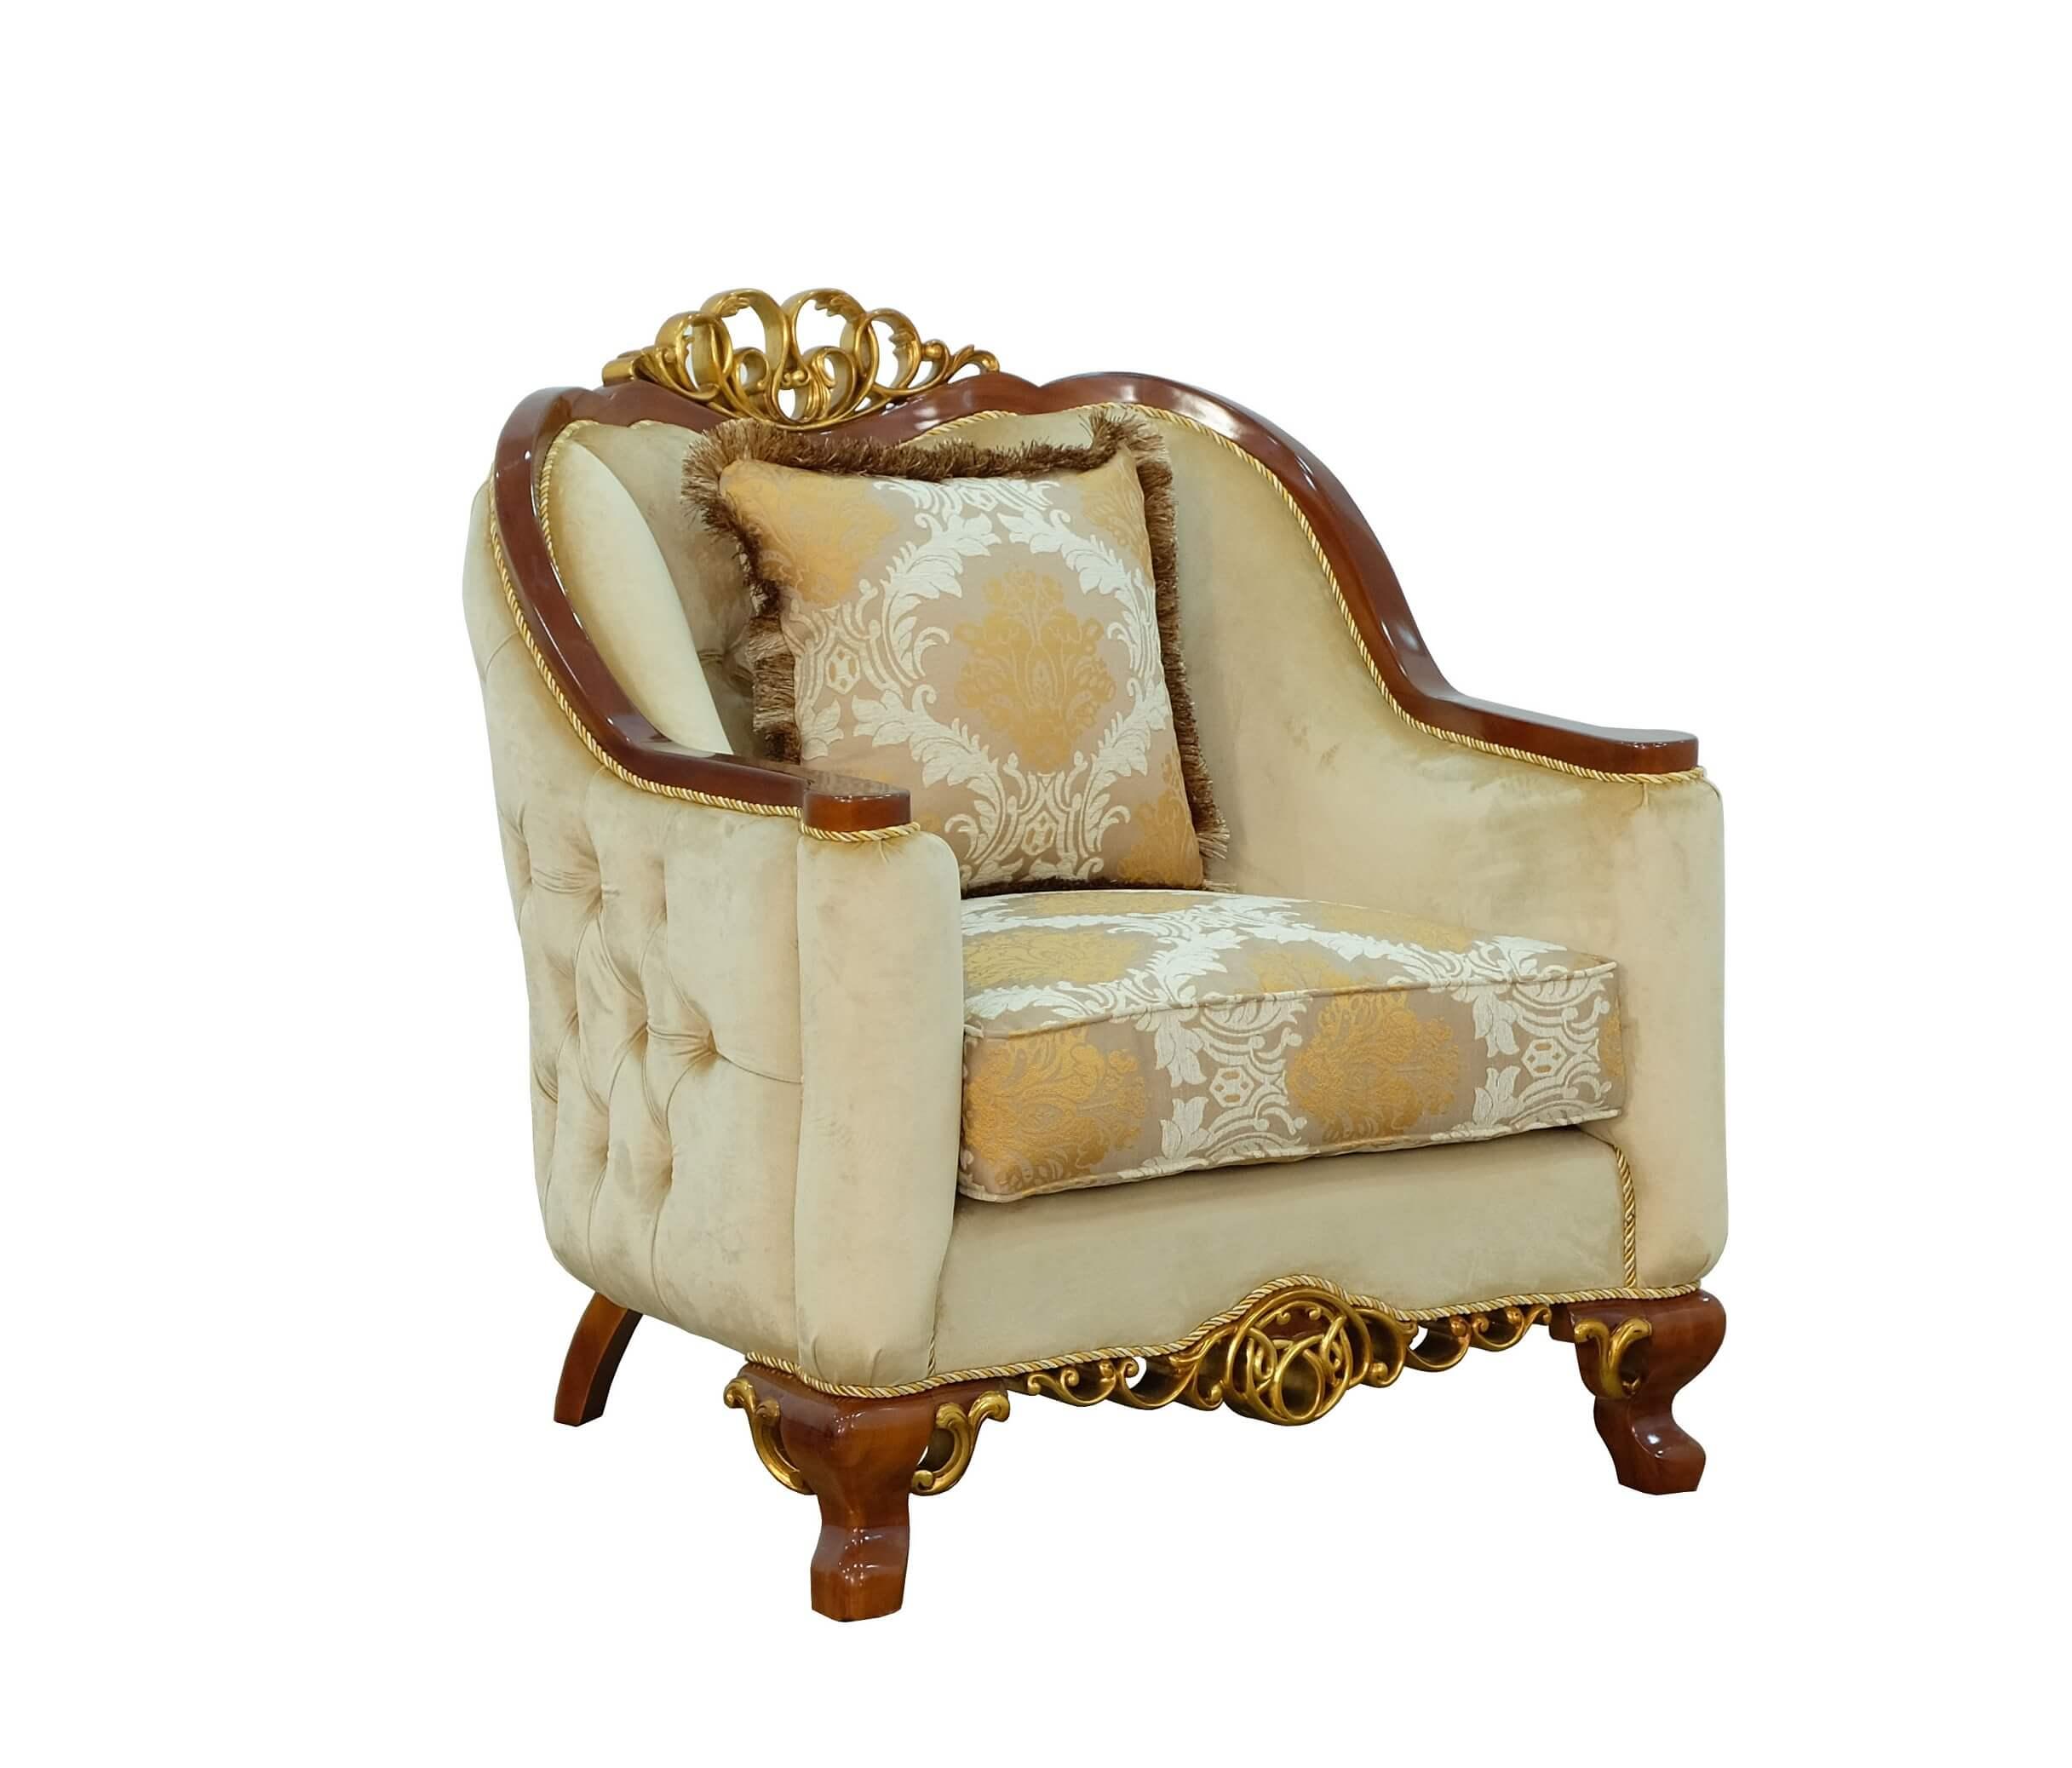 Classic, Traditional Arm Chair ANGELICA II 45354-C in Gold, Brown Fabric